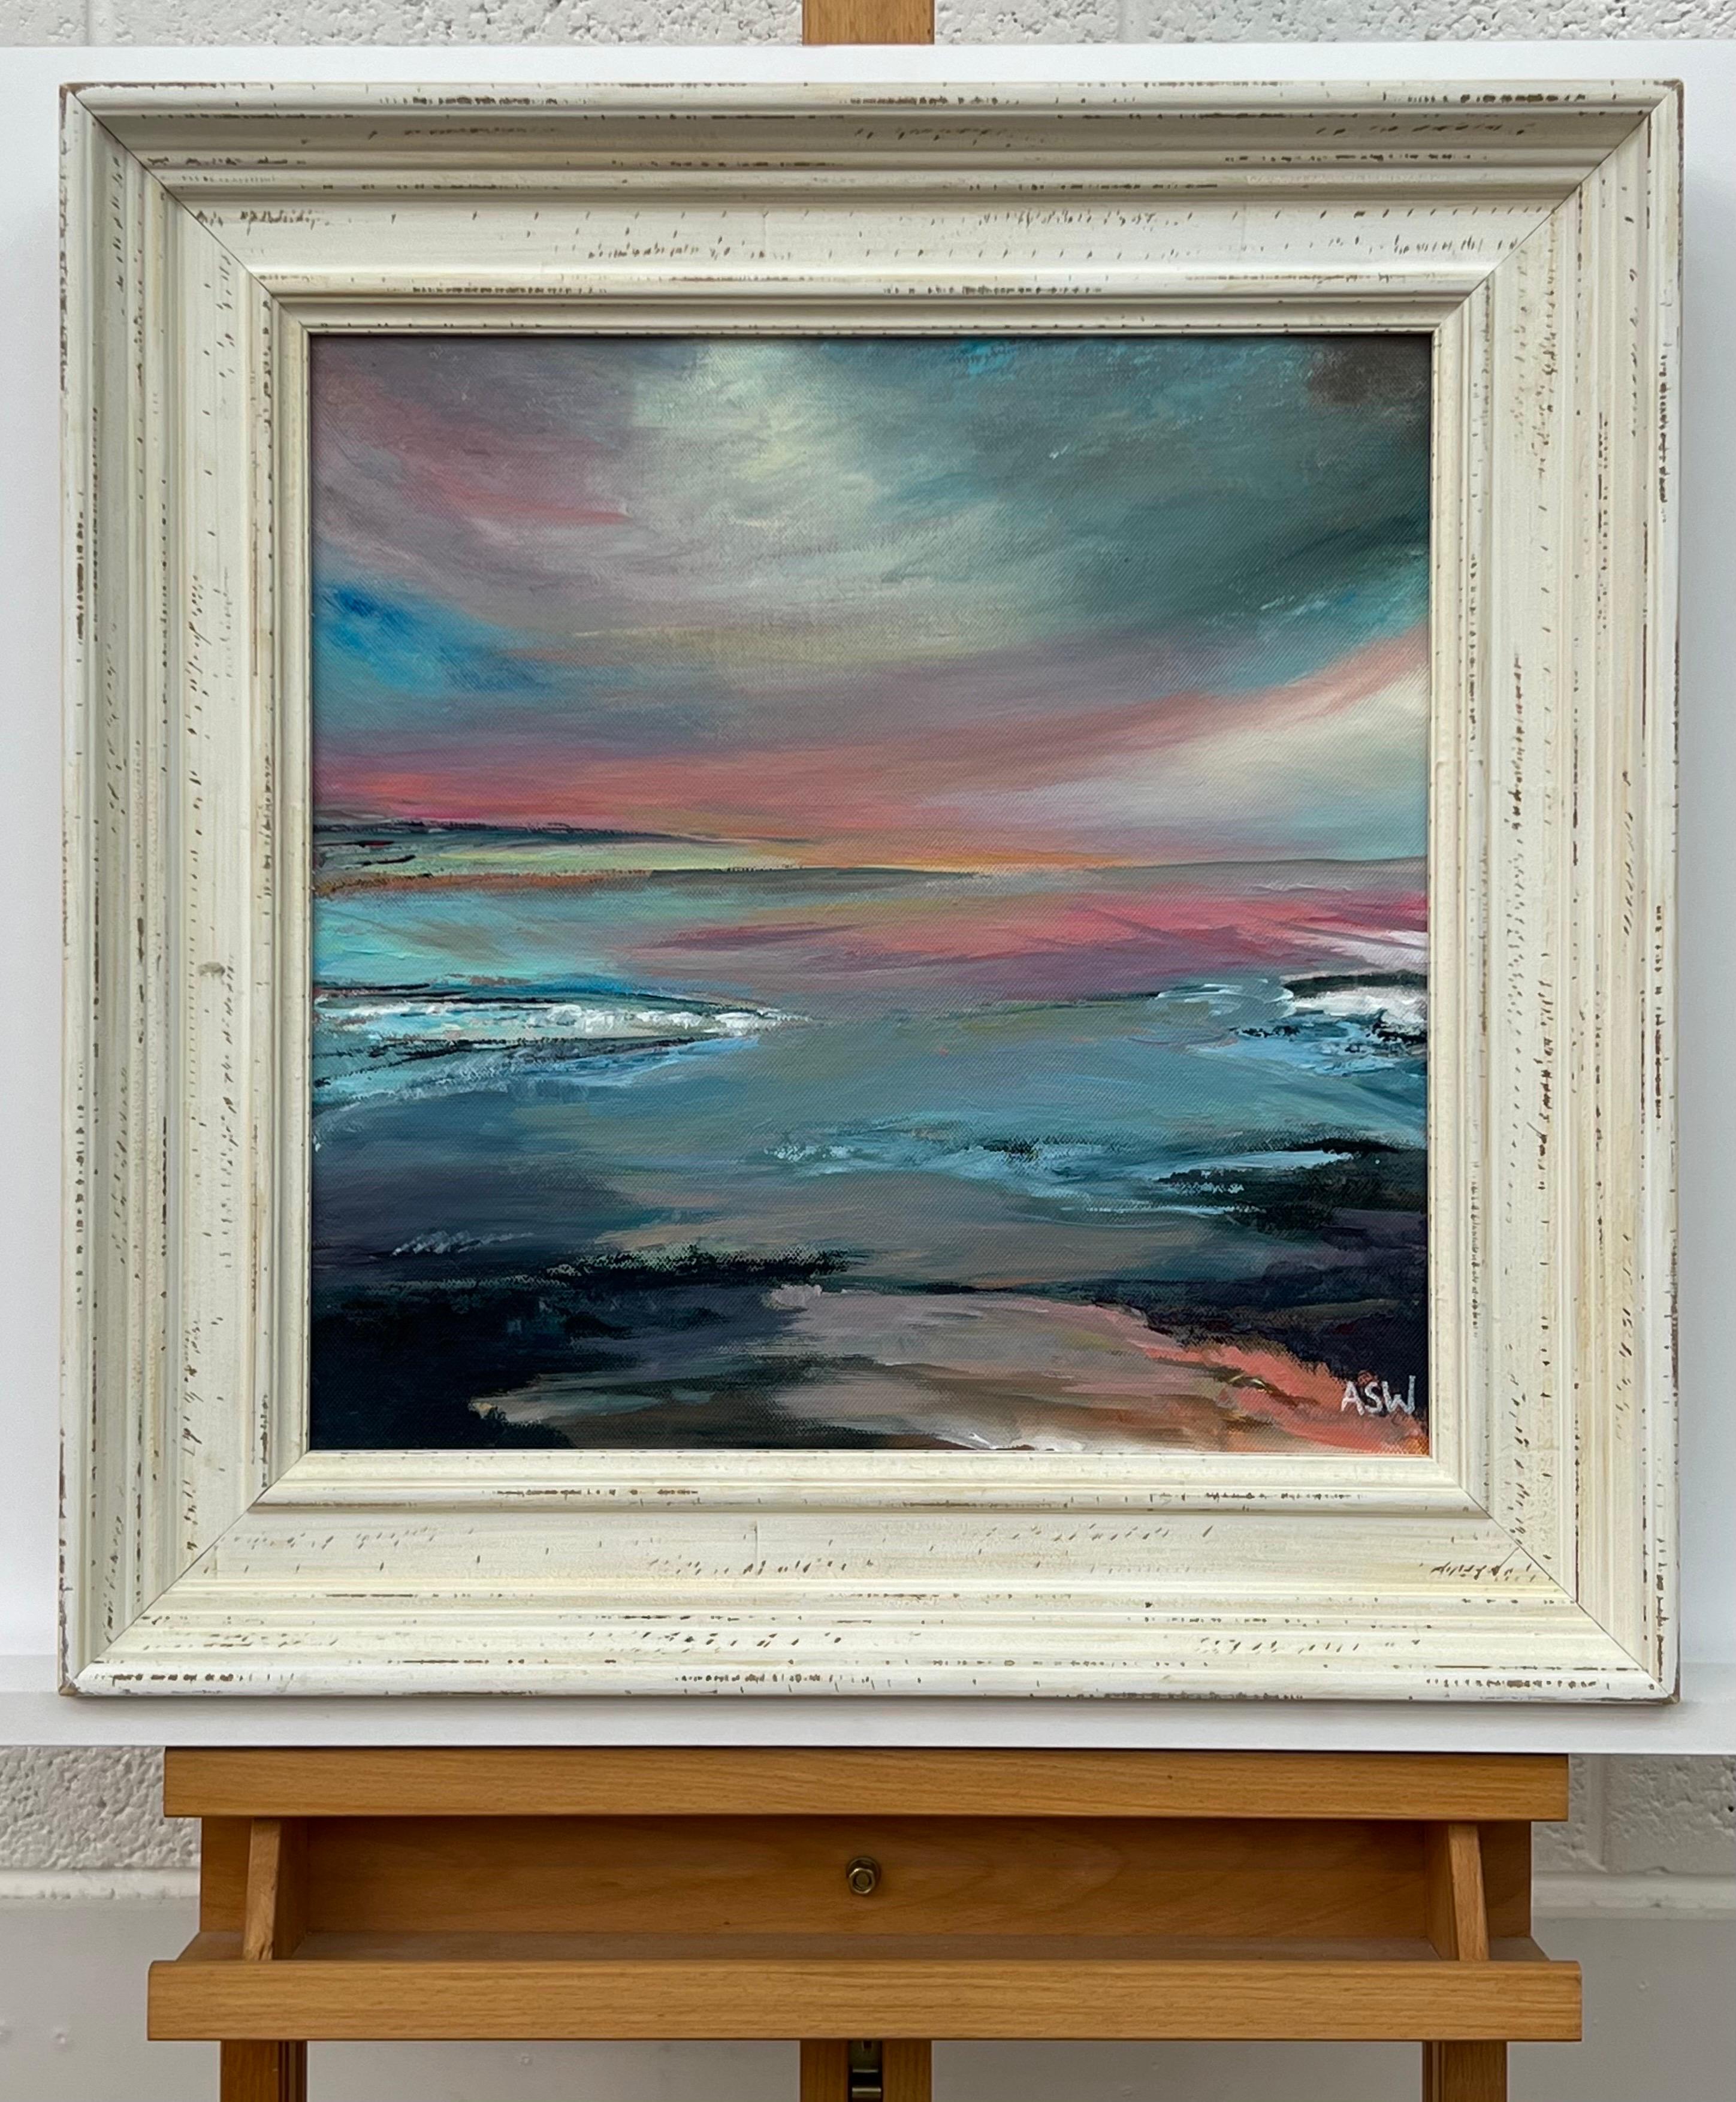 Atmospheric Pink & Blue Seascape Landscape Art by Contemporary British Artist - Abstract Expressionist Painting by Angela Wakefield